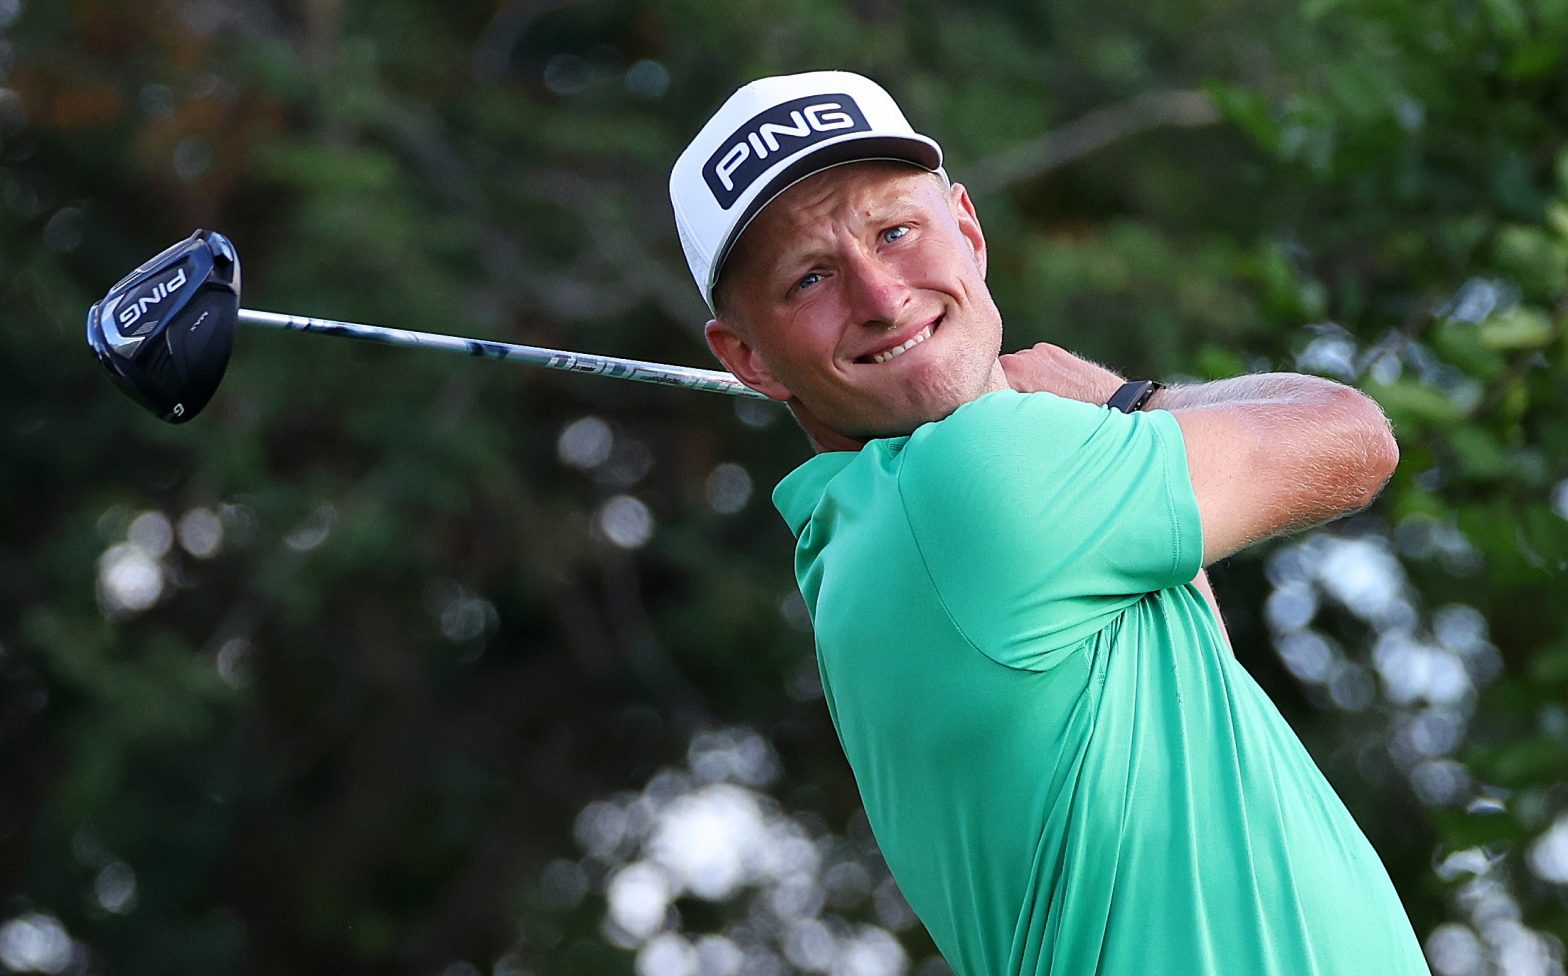 Meronk leads young stars at Leopard Creek